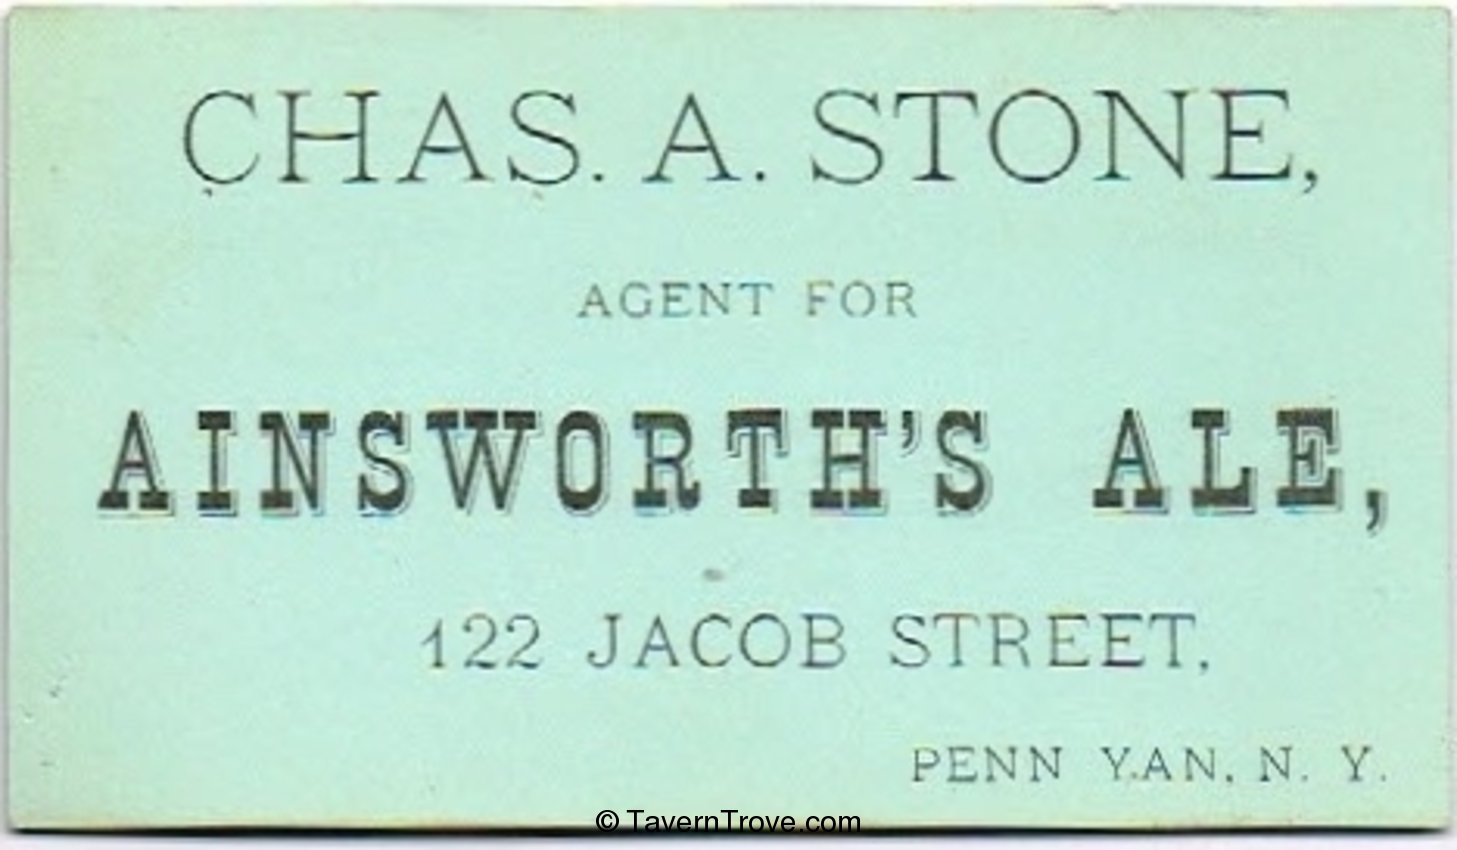 Chas. A. Stone, Agent